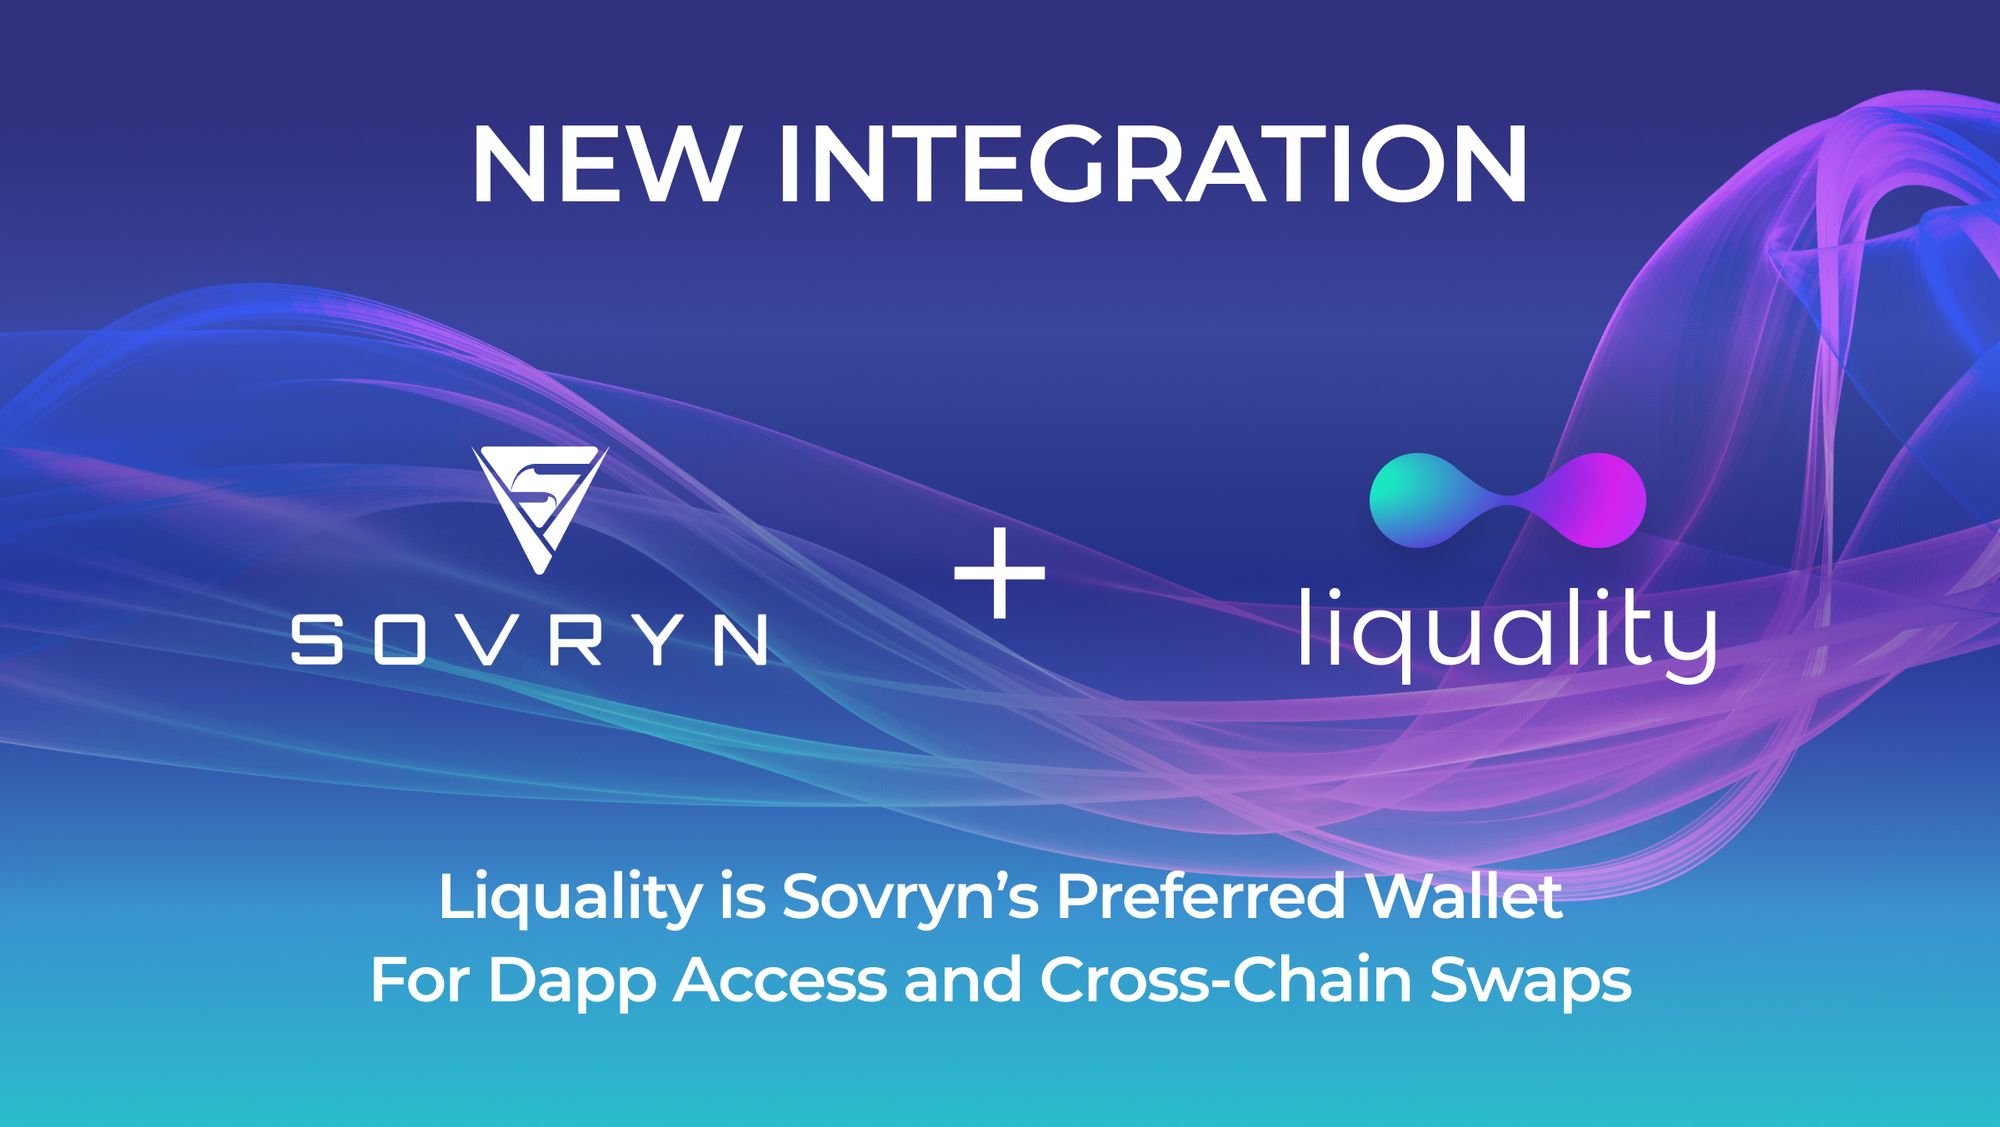 Our Partnership with Sovryn